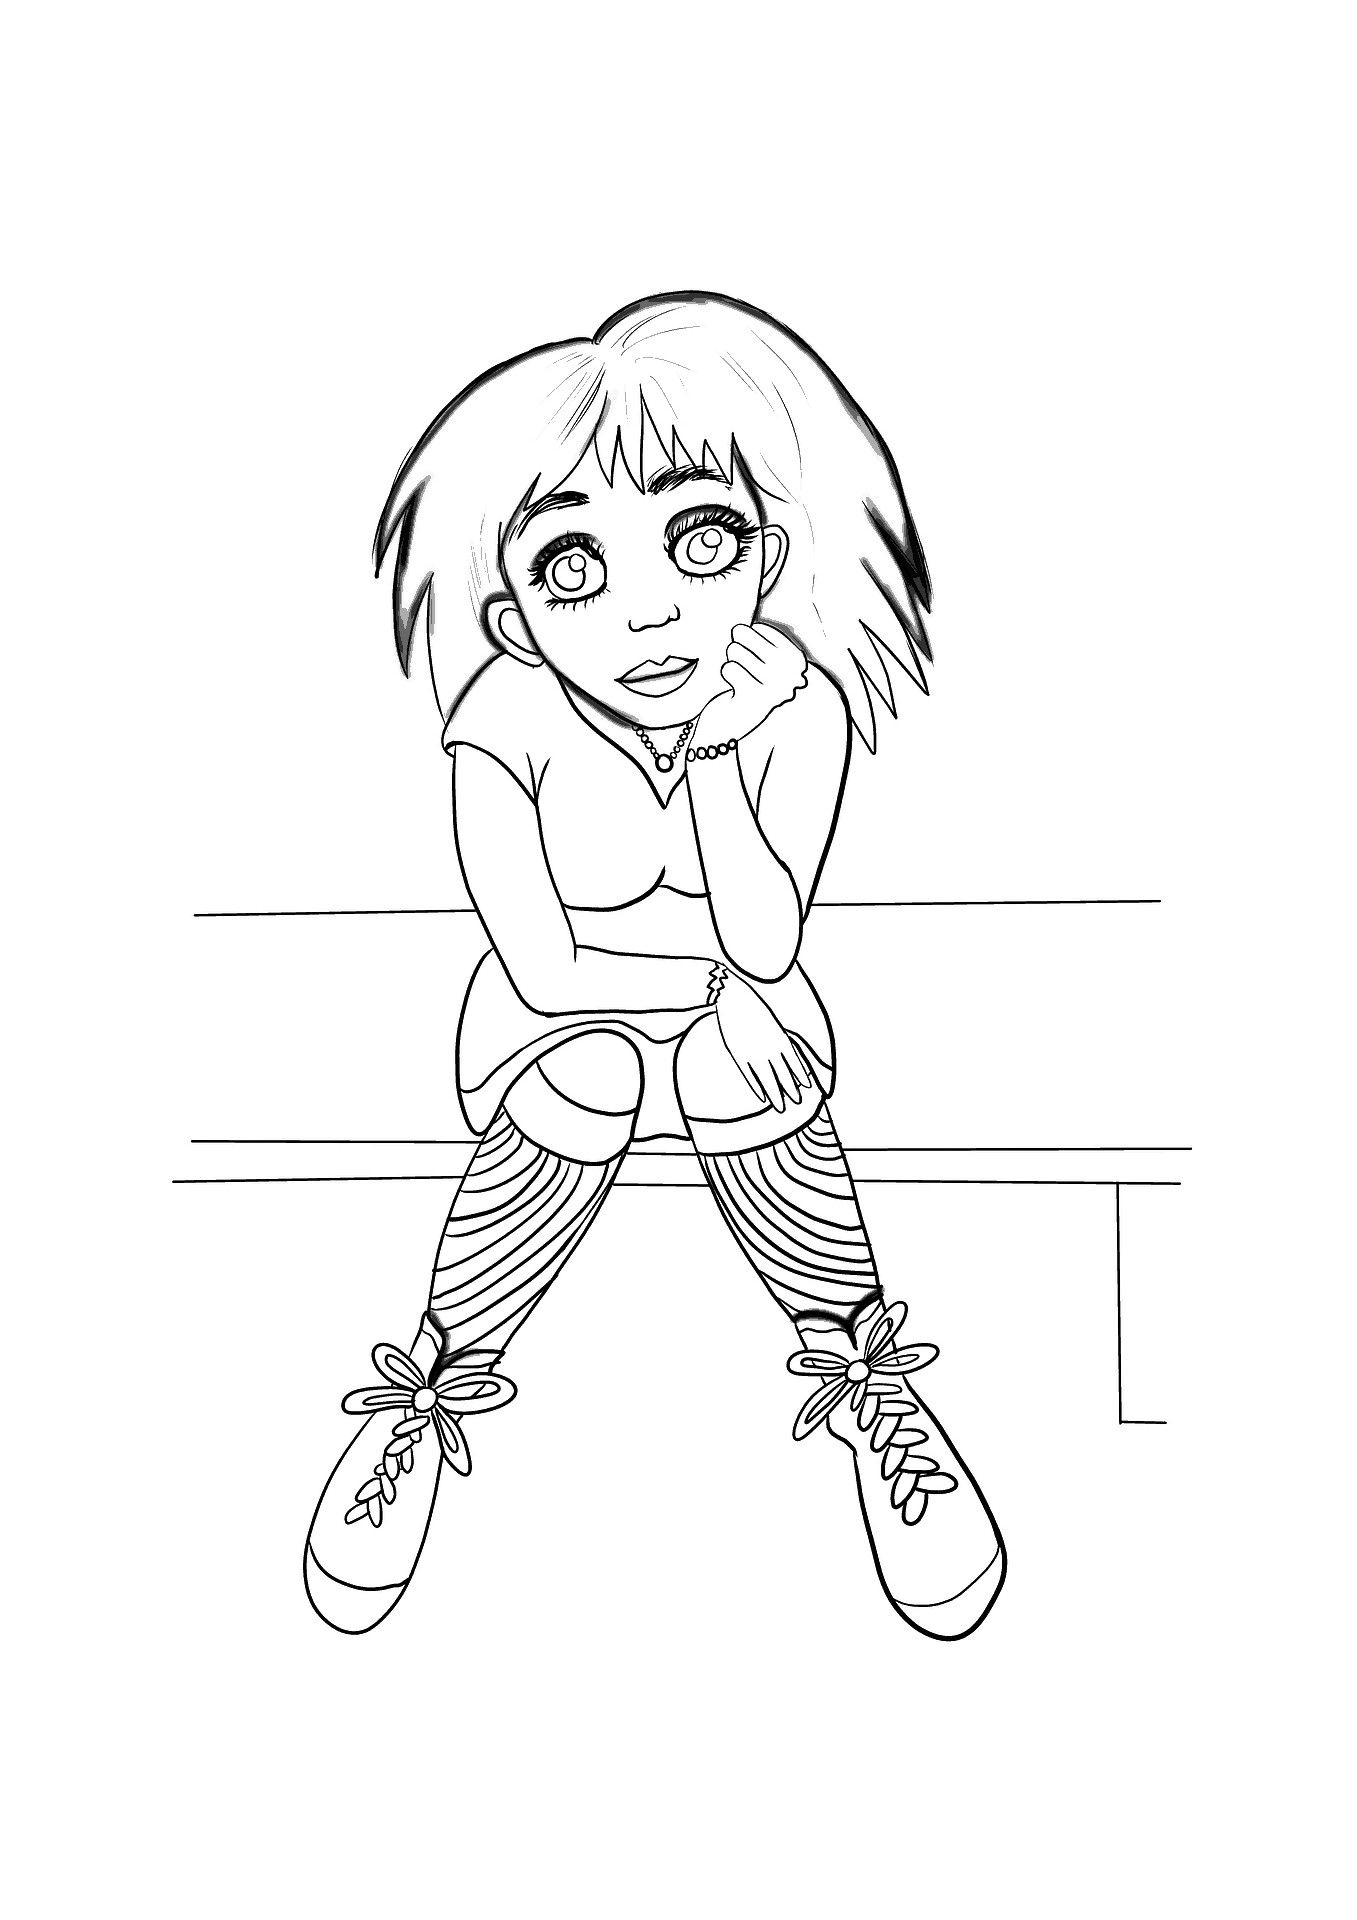 Coloring Book Pages Girls
 The Best Free Coloring Pages For Girls